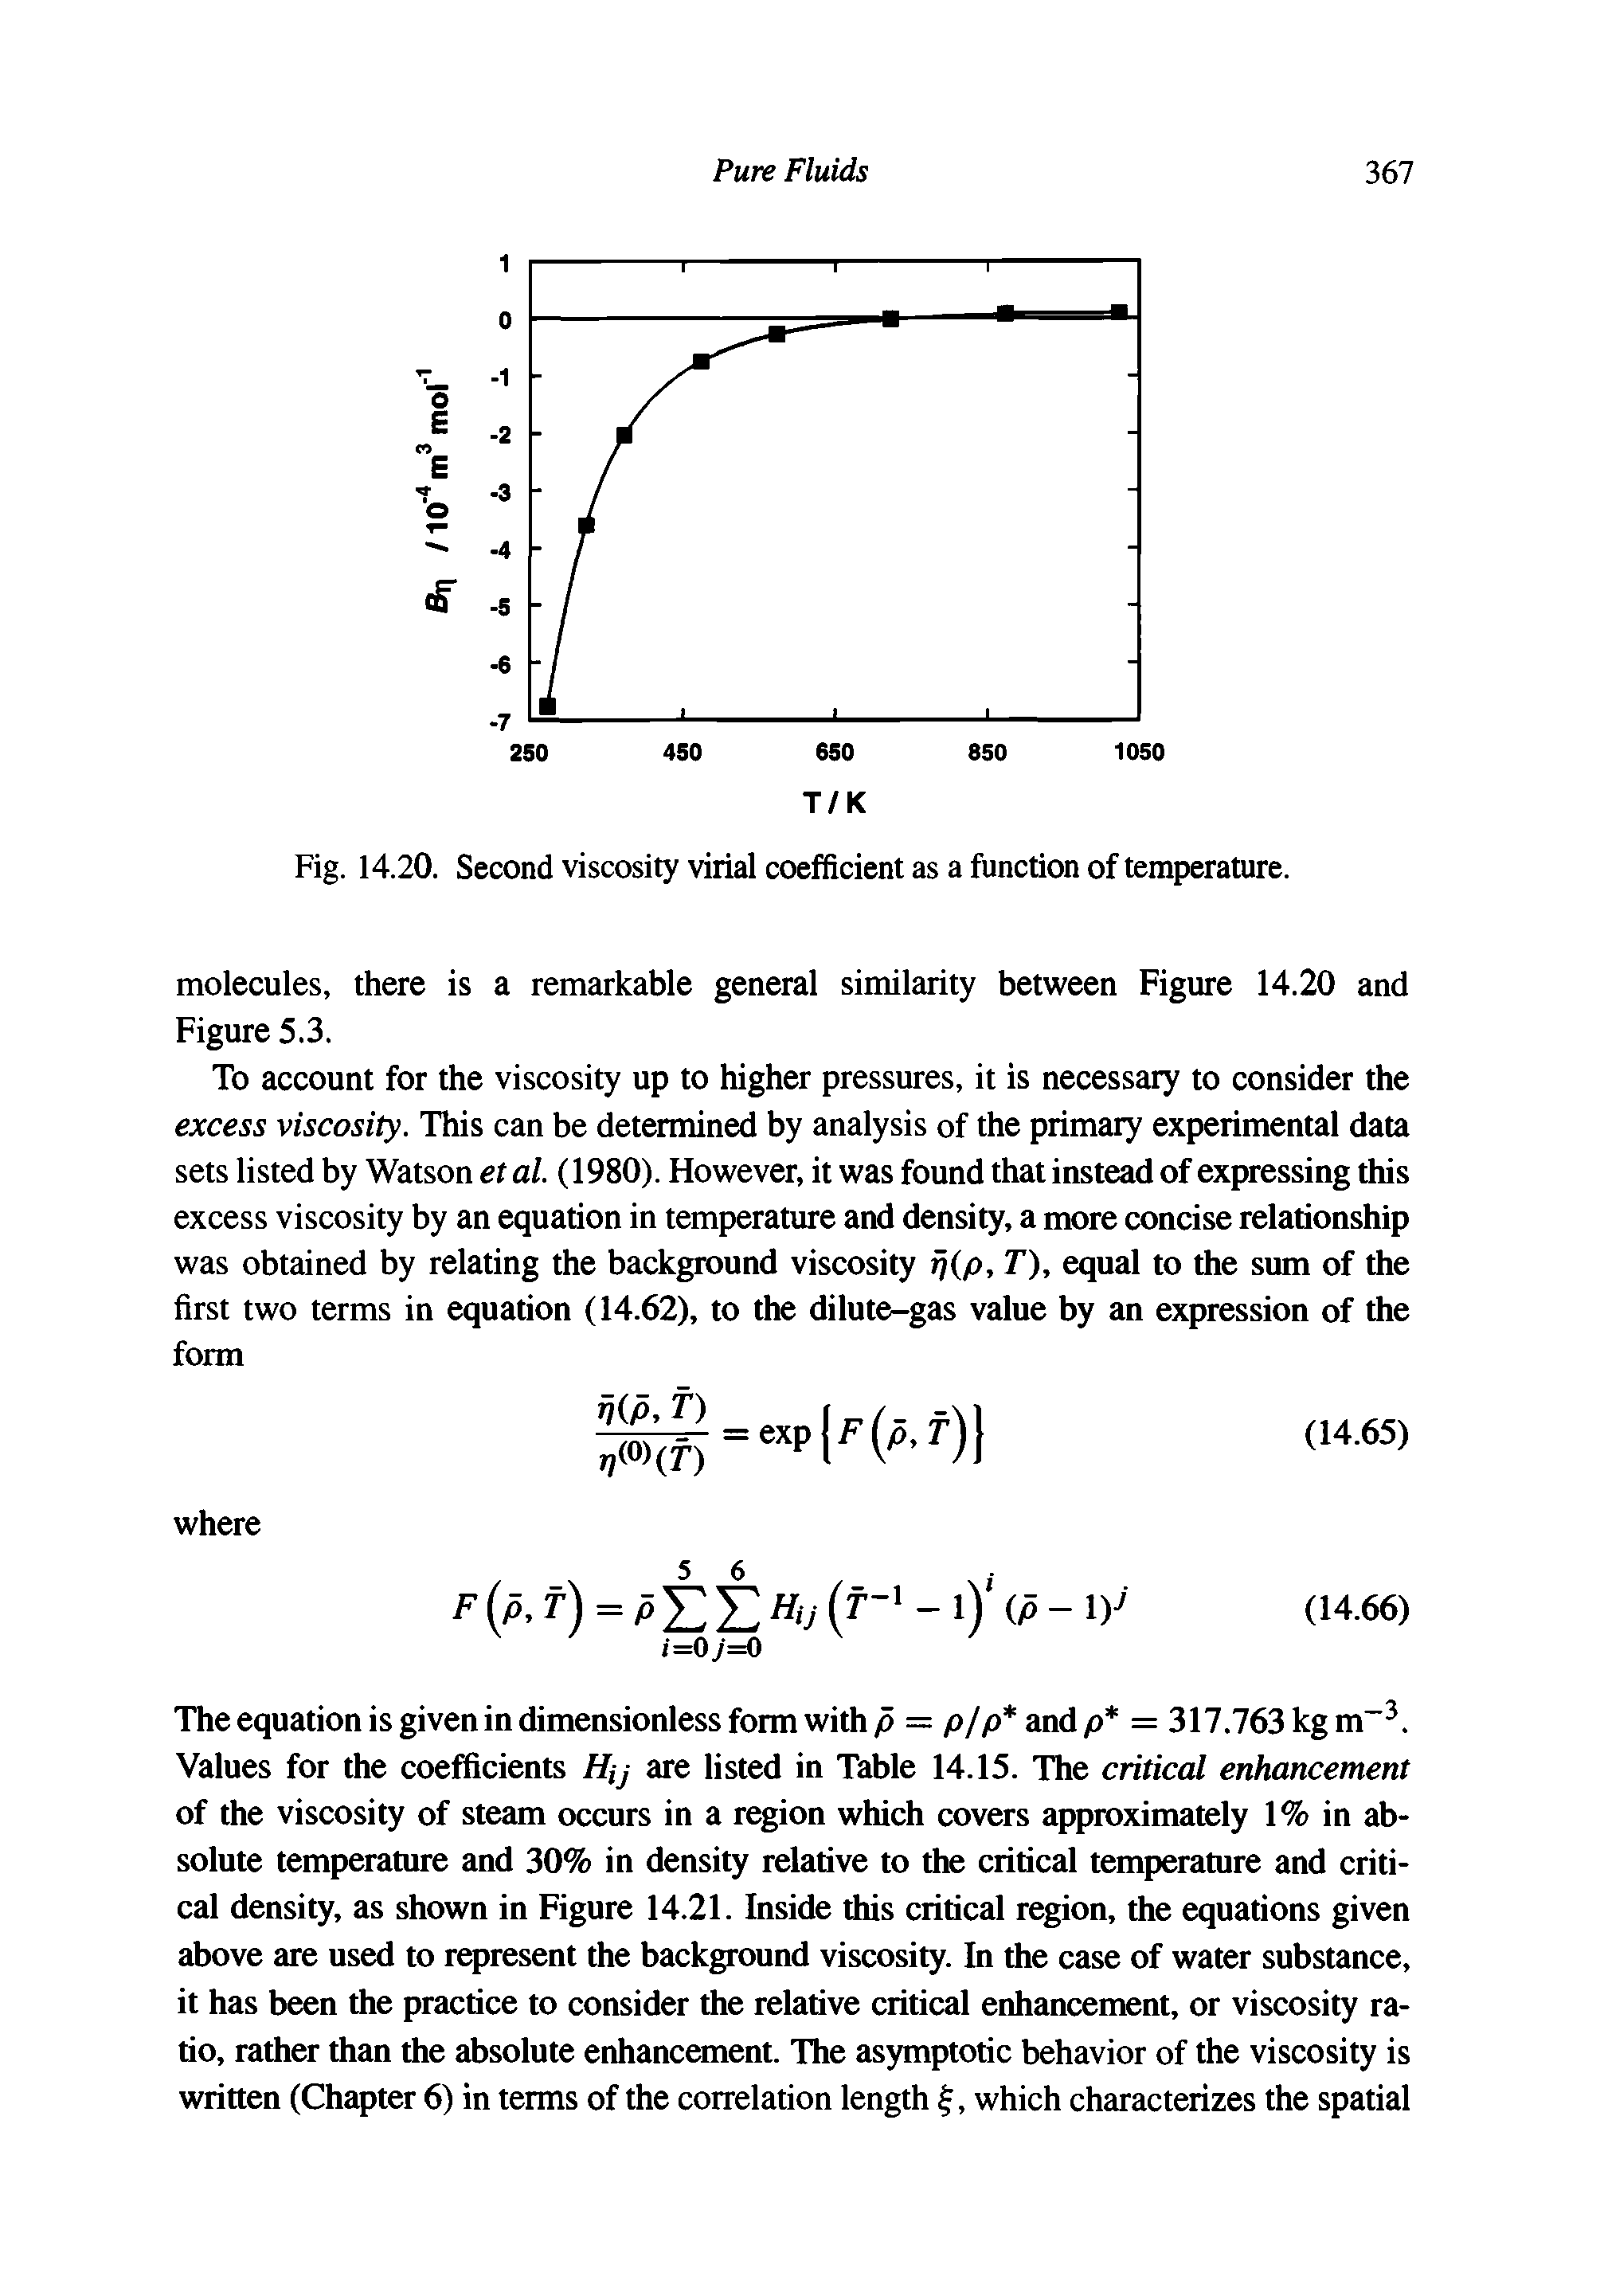 Fig. 14.20. Second viscosity virial coefficient as a function of temperature.